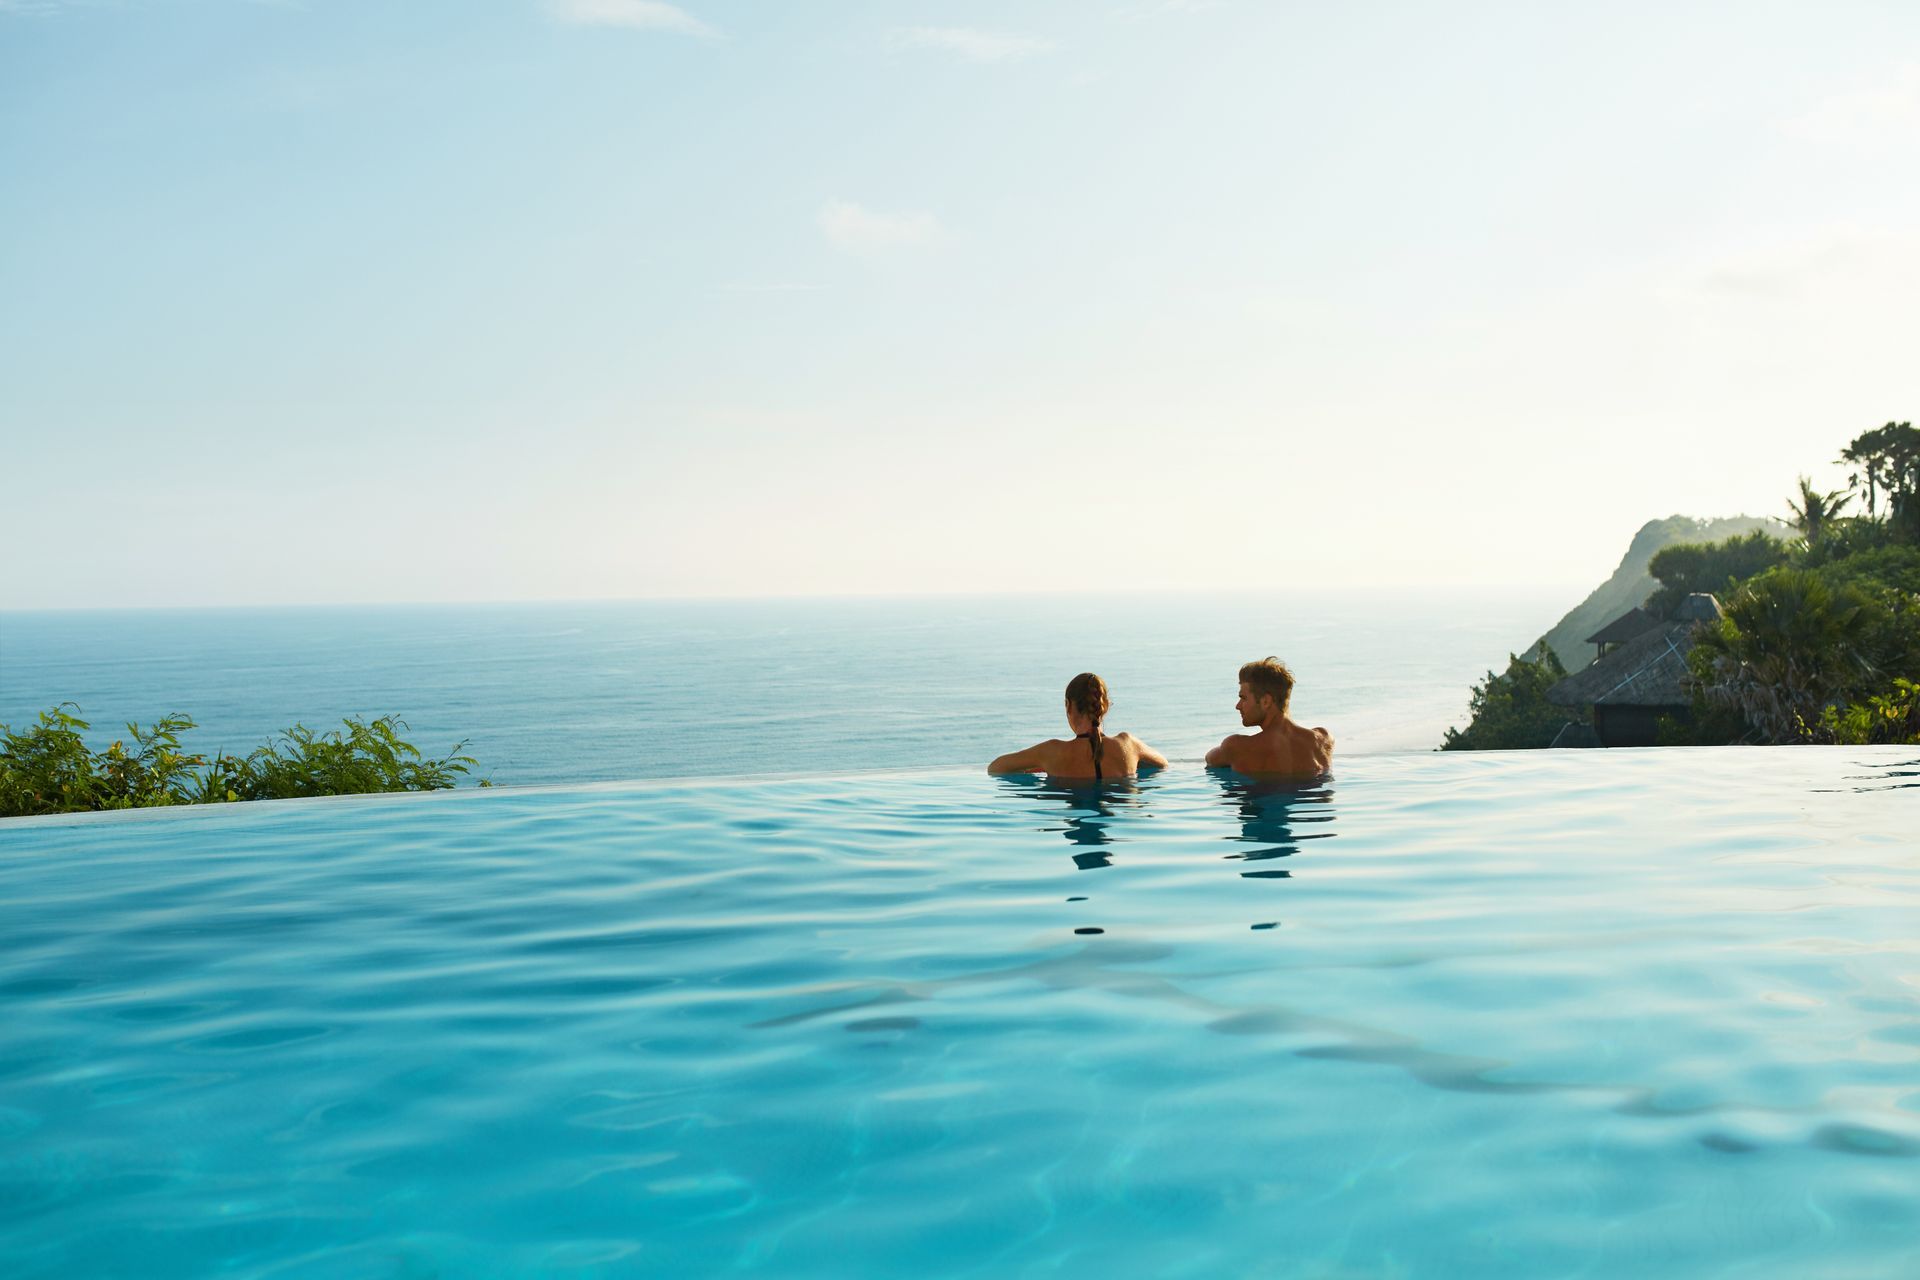 Two people are swimming in an infinity pool overlooking the ocean.